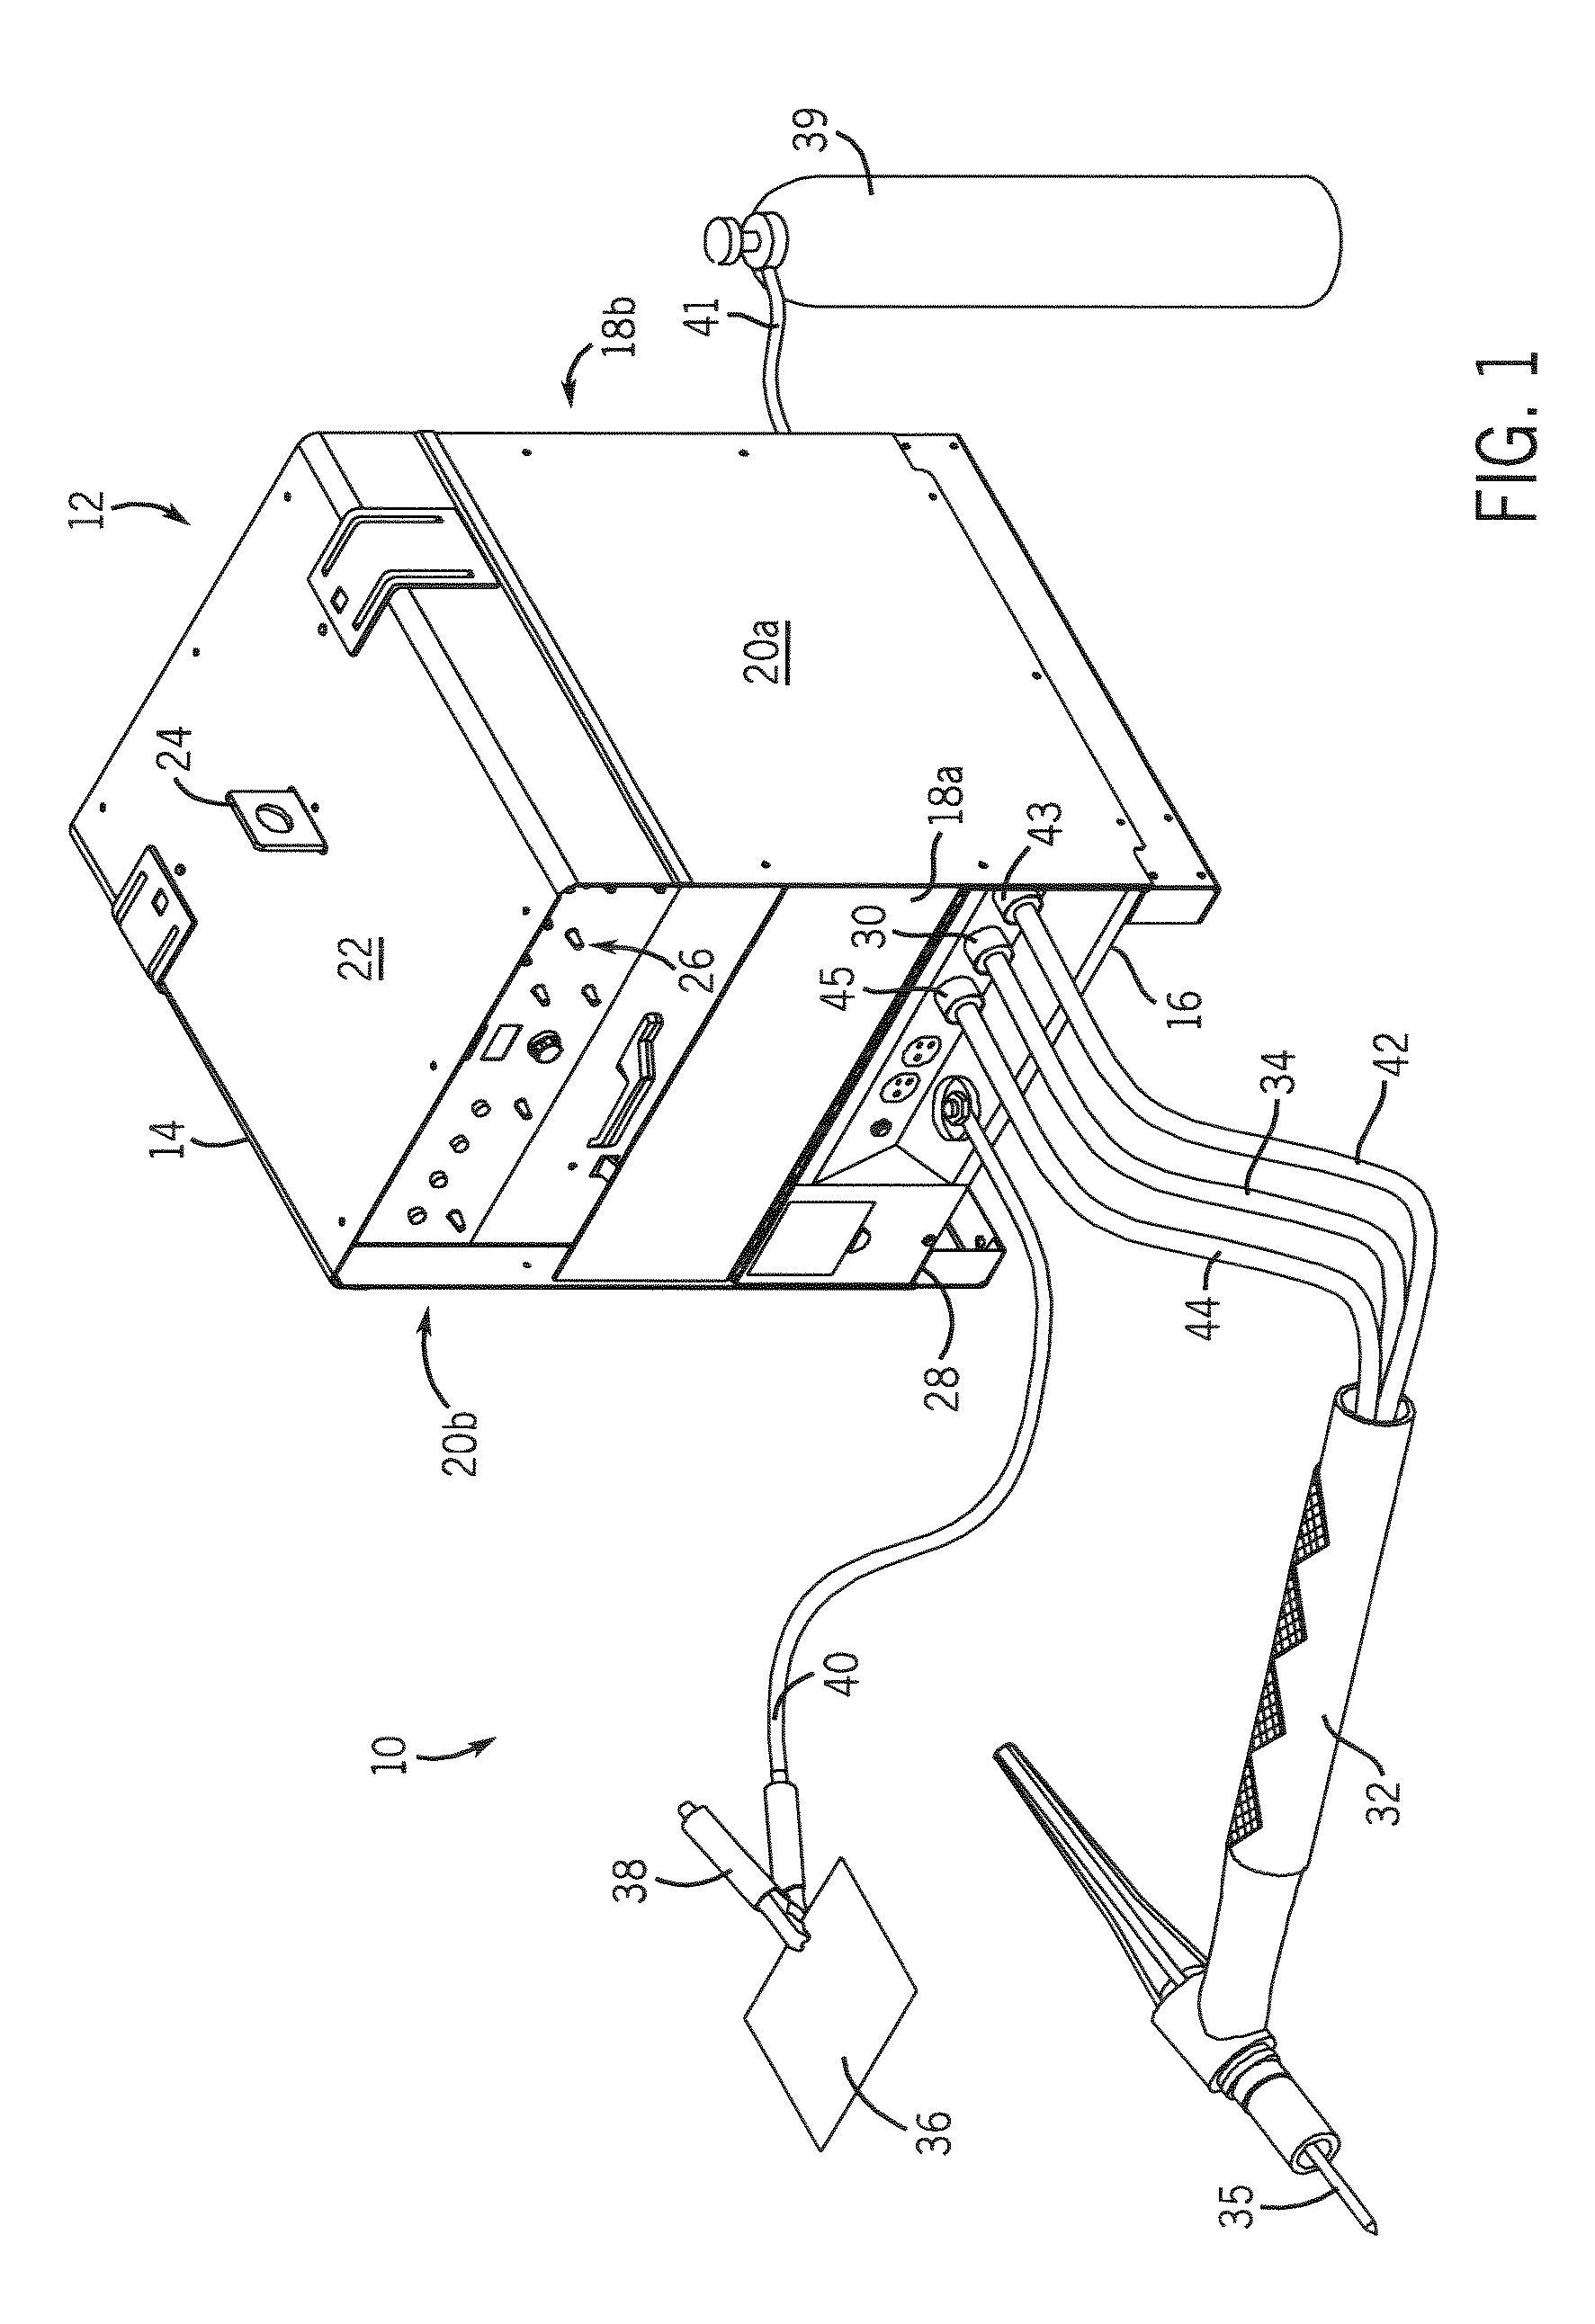 Torch connection detection system and method